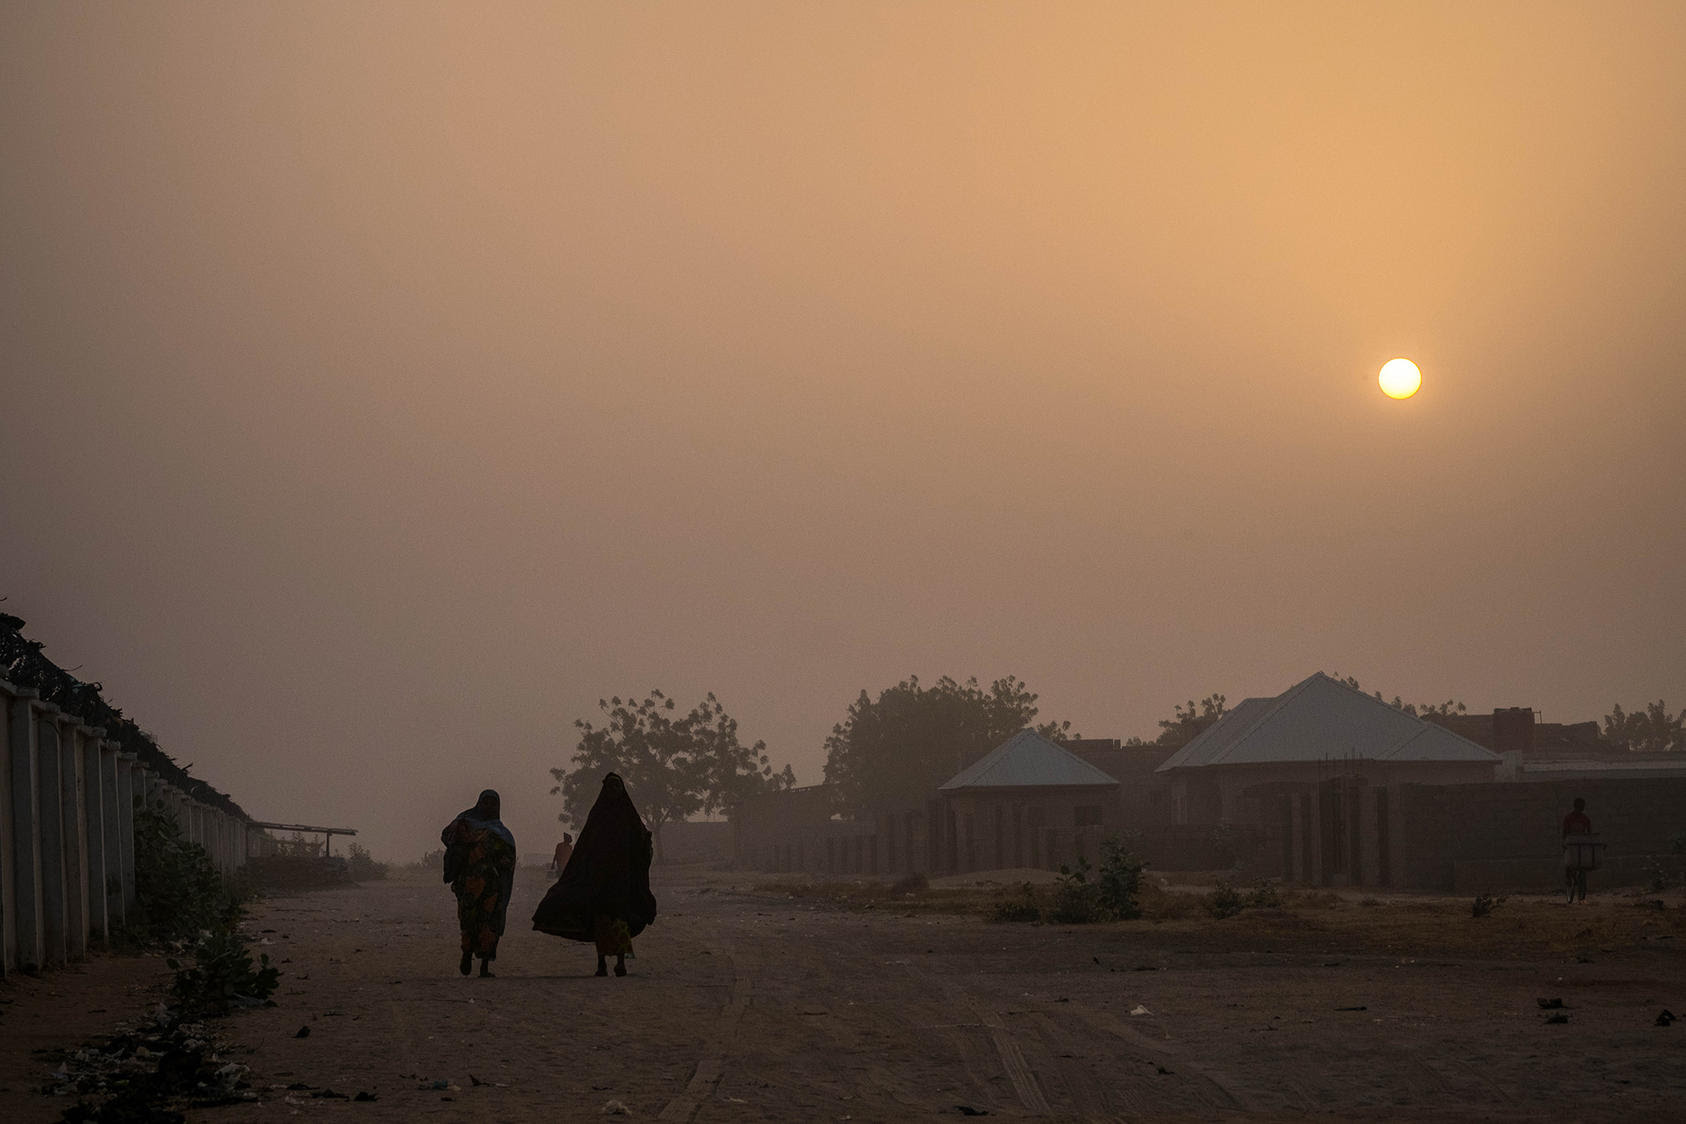 People walk in the early morning in Maiduguri, Nigeria, where many refugees from the conflict with the Boko Haram group have fled. (Ashley Gilbertson/The New York Times)